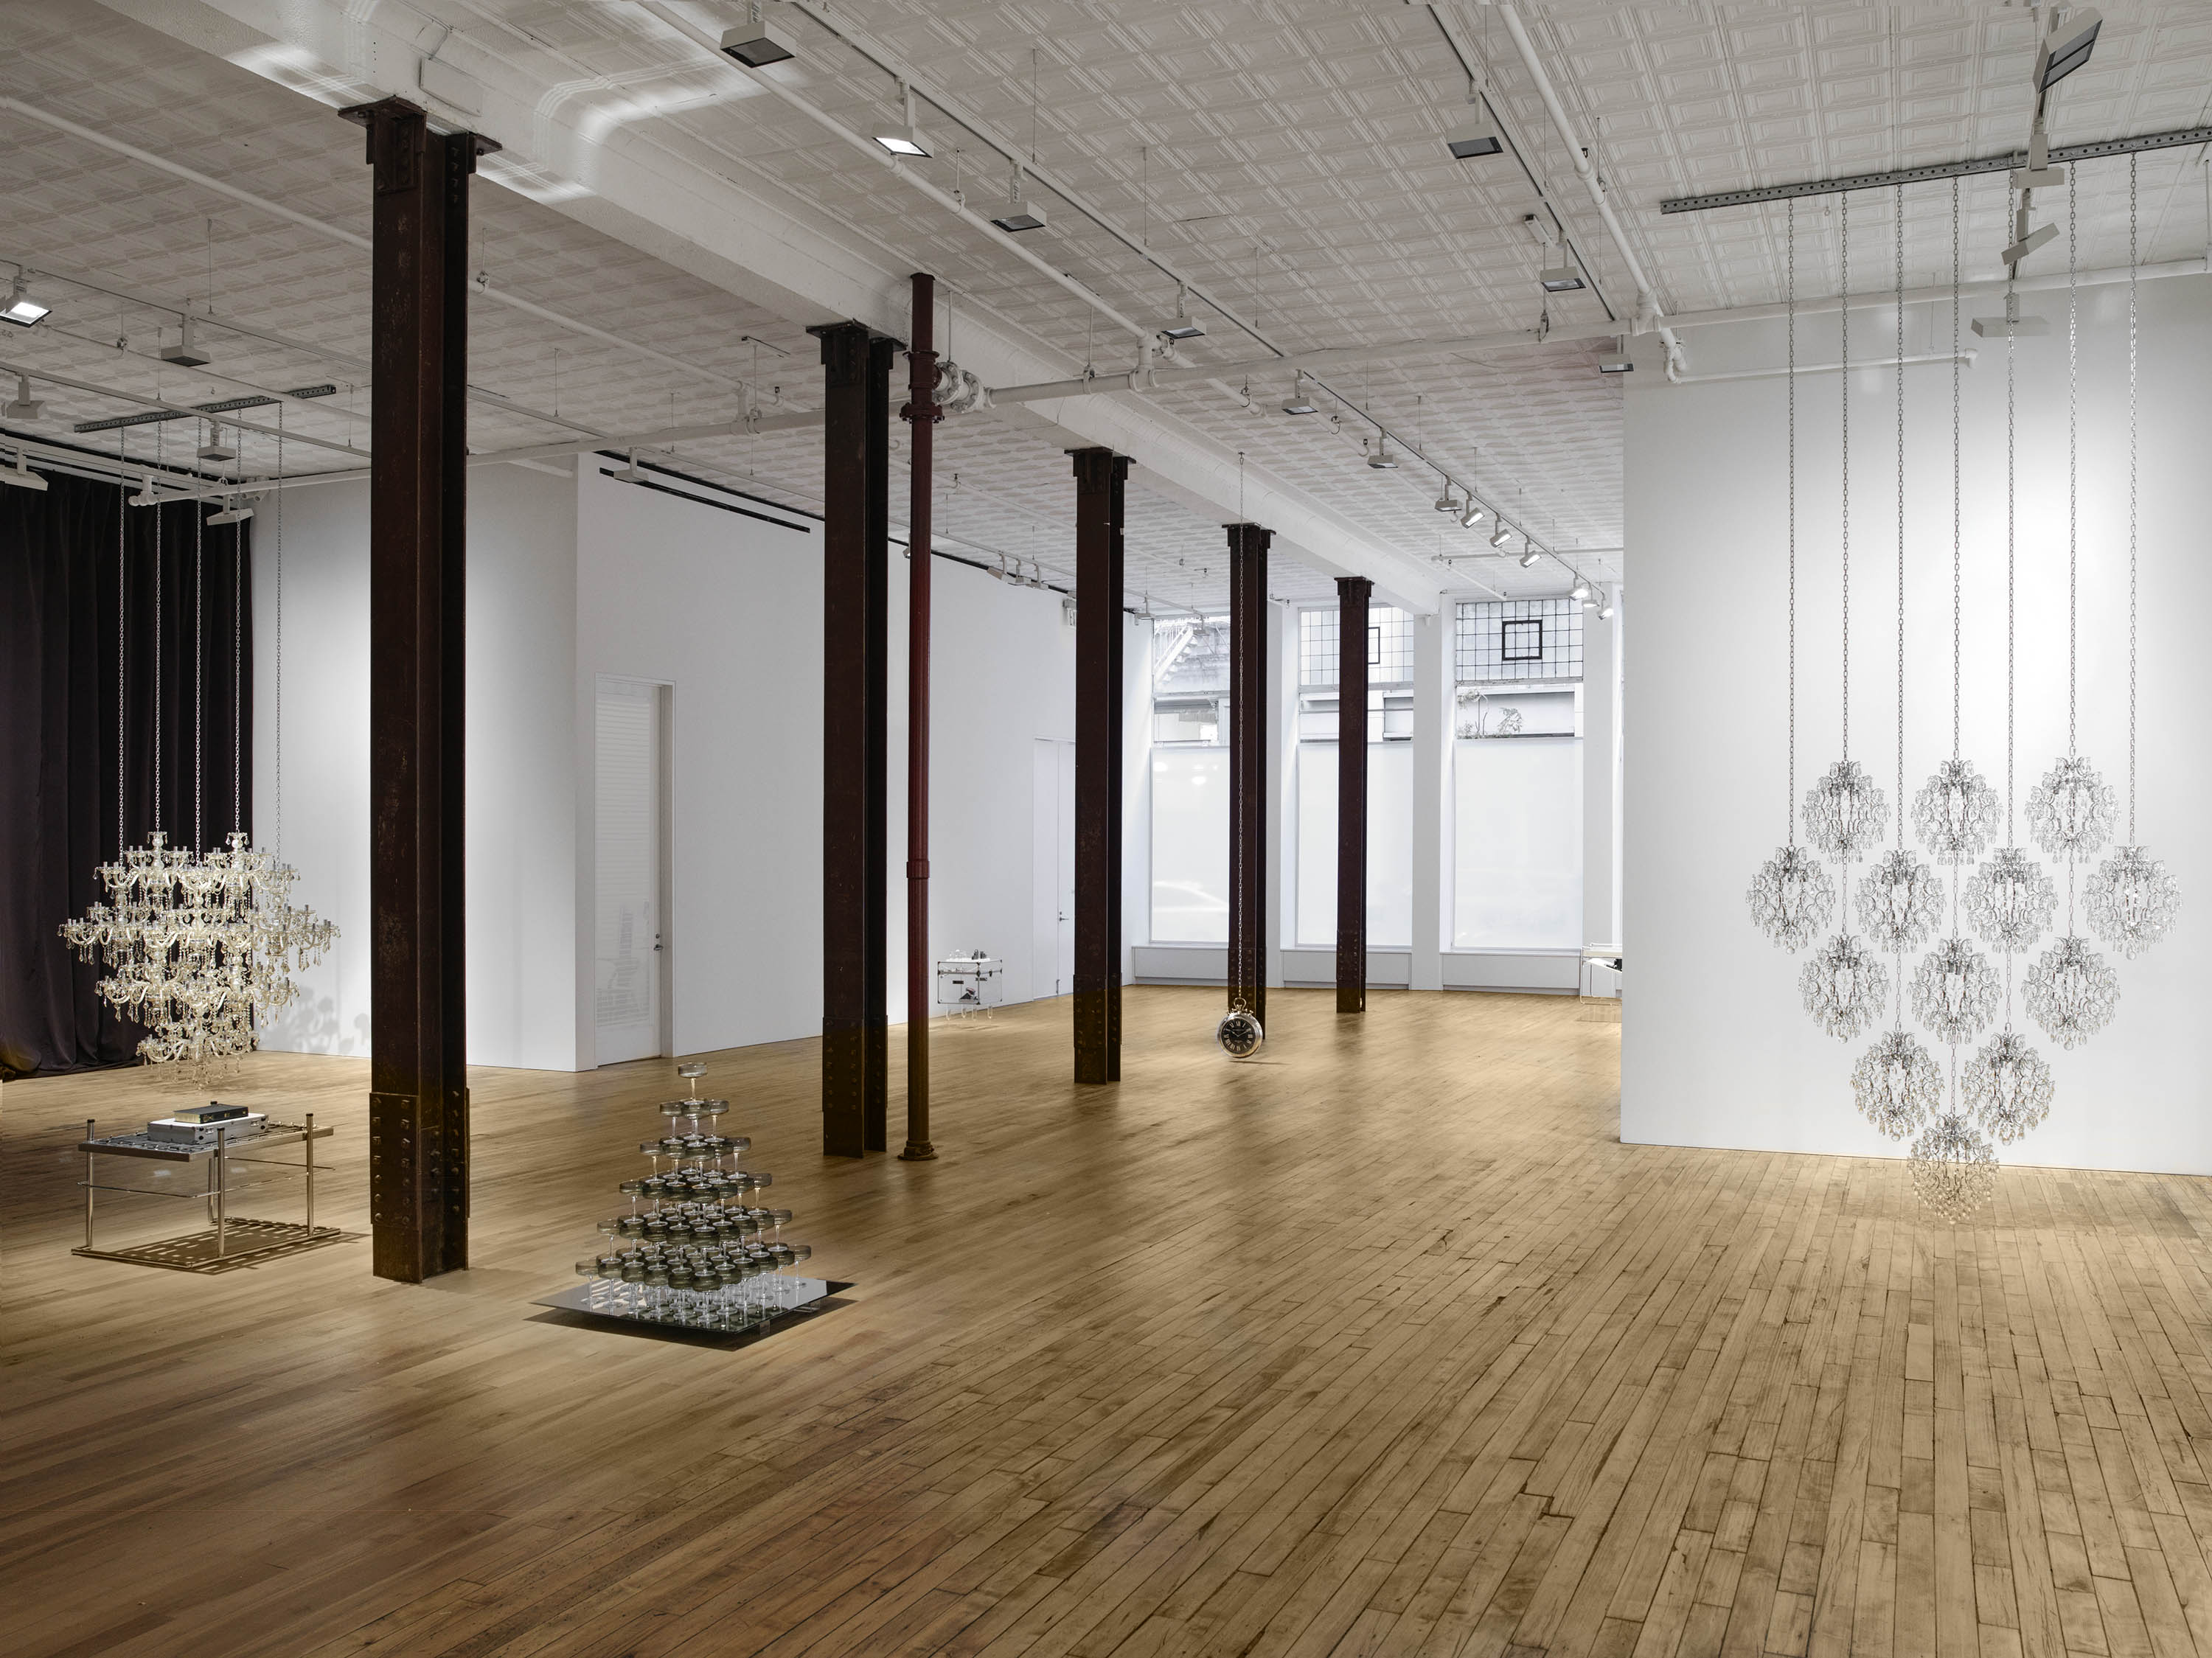 Installation View  of the exhibition "Kayode Ojo: EDEN" at 52 Walker in New York, dated 2023